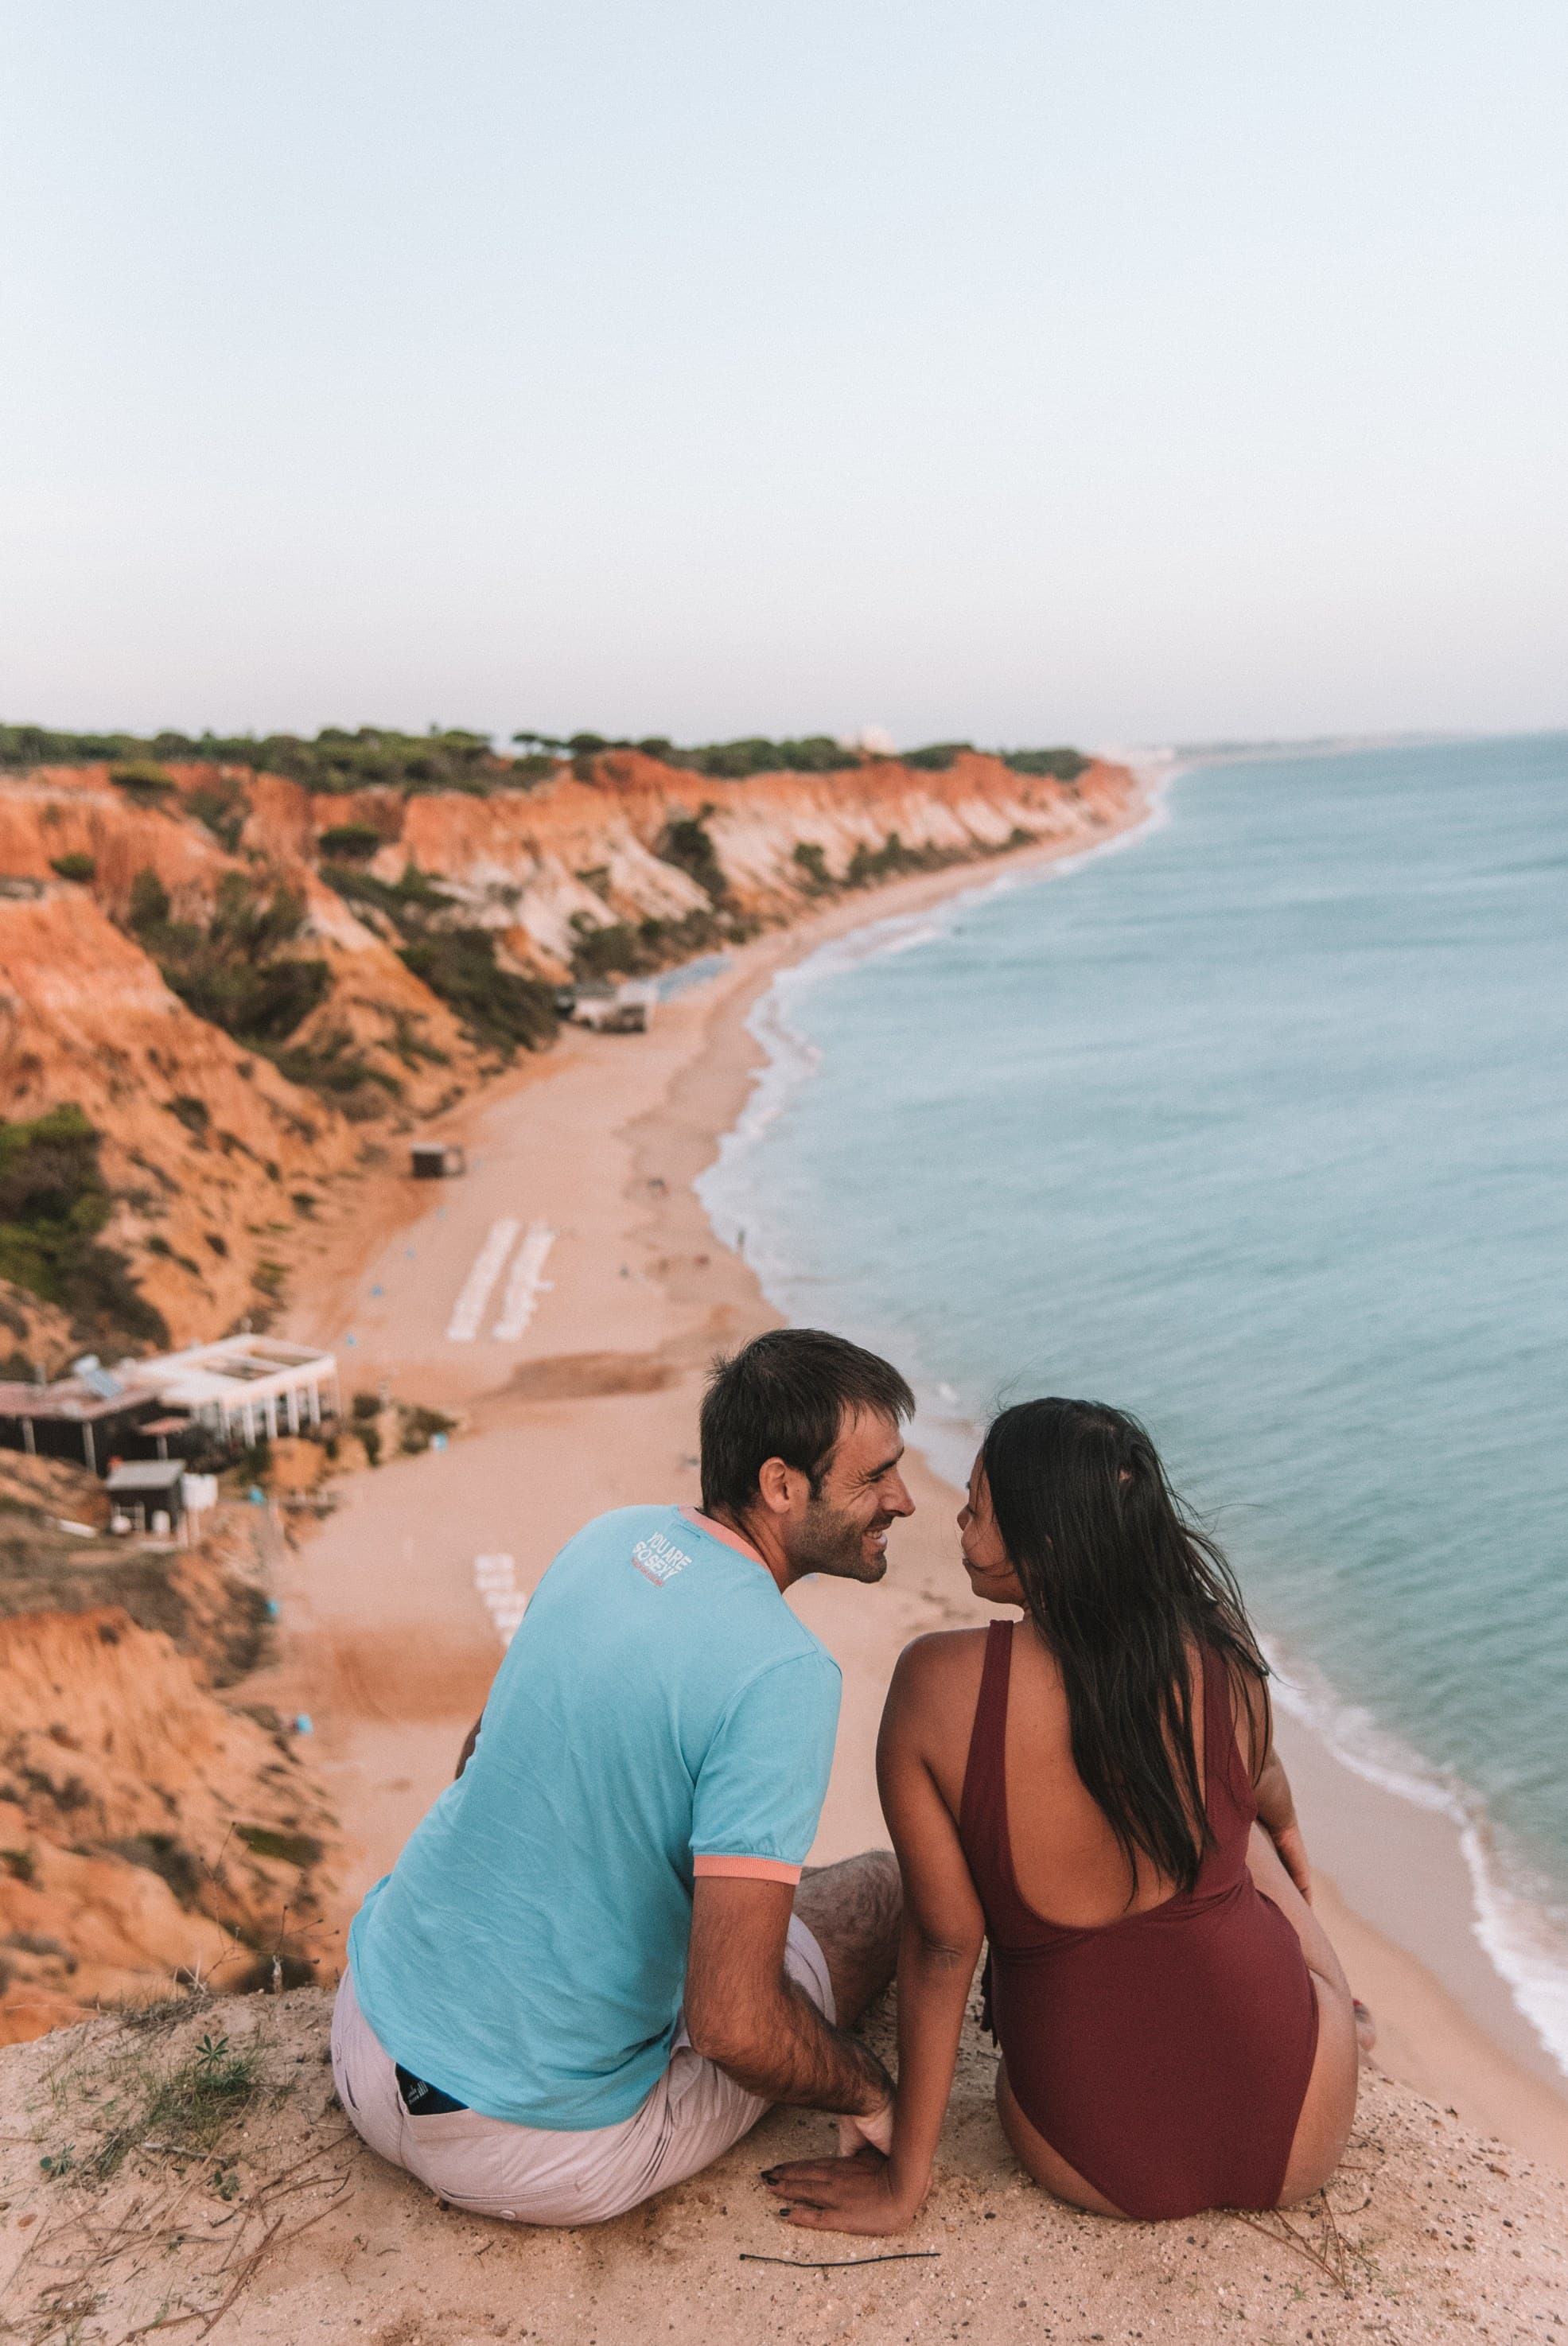 Road trip to Algarve, Budget travel in Portugal